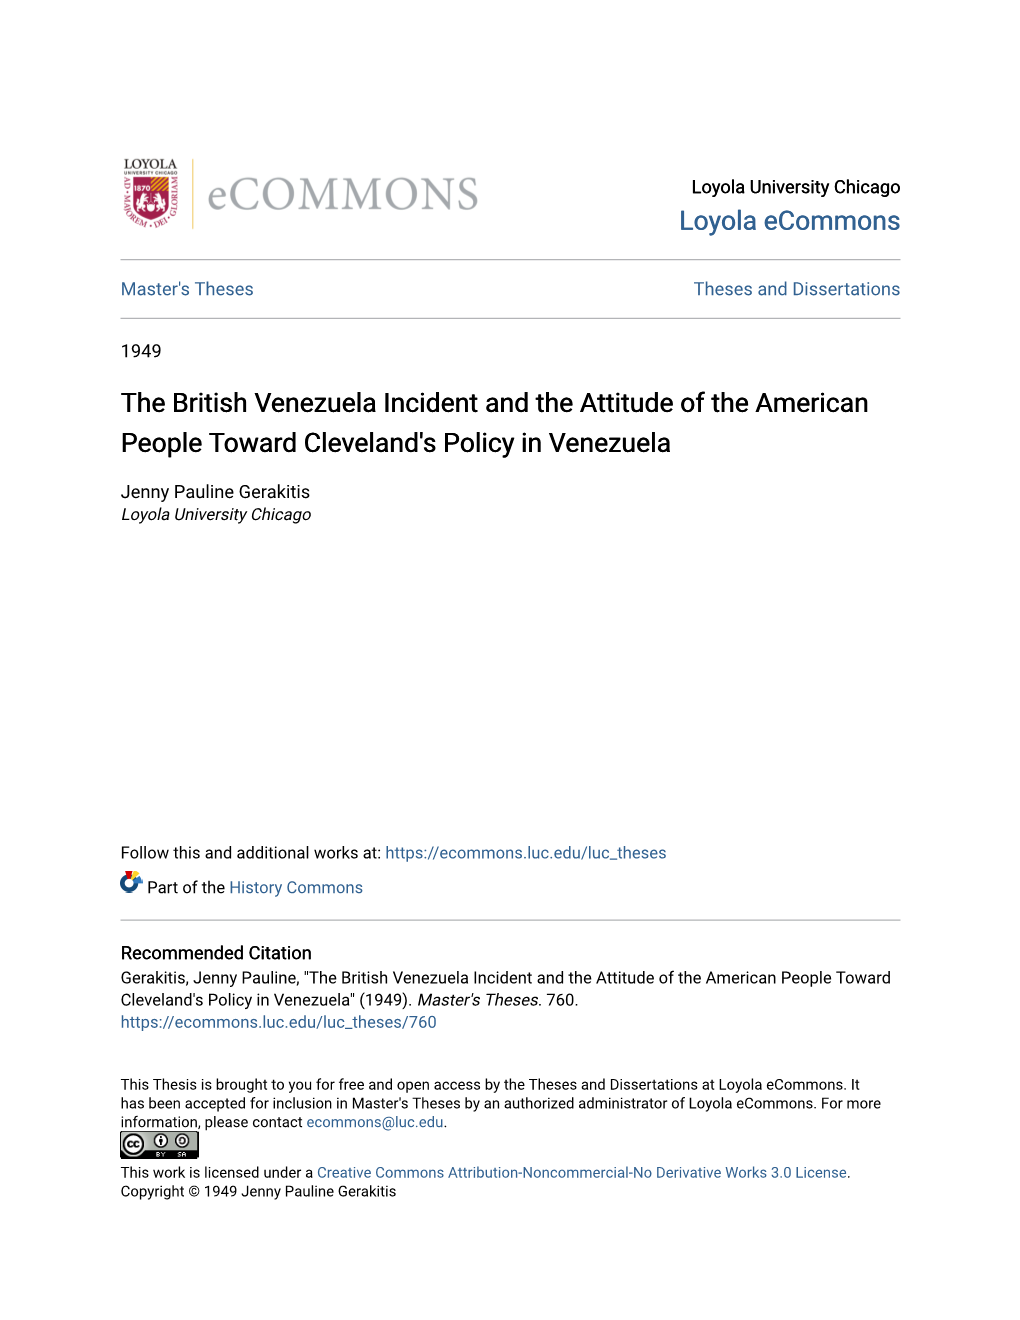 The British Venezuela Incident and the Attitude of the American People Toward Cleveland's Policy in Venezuela